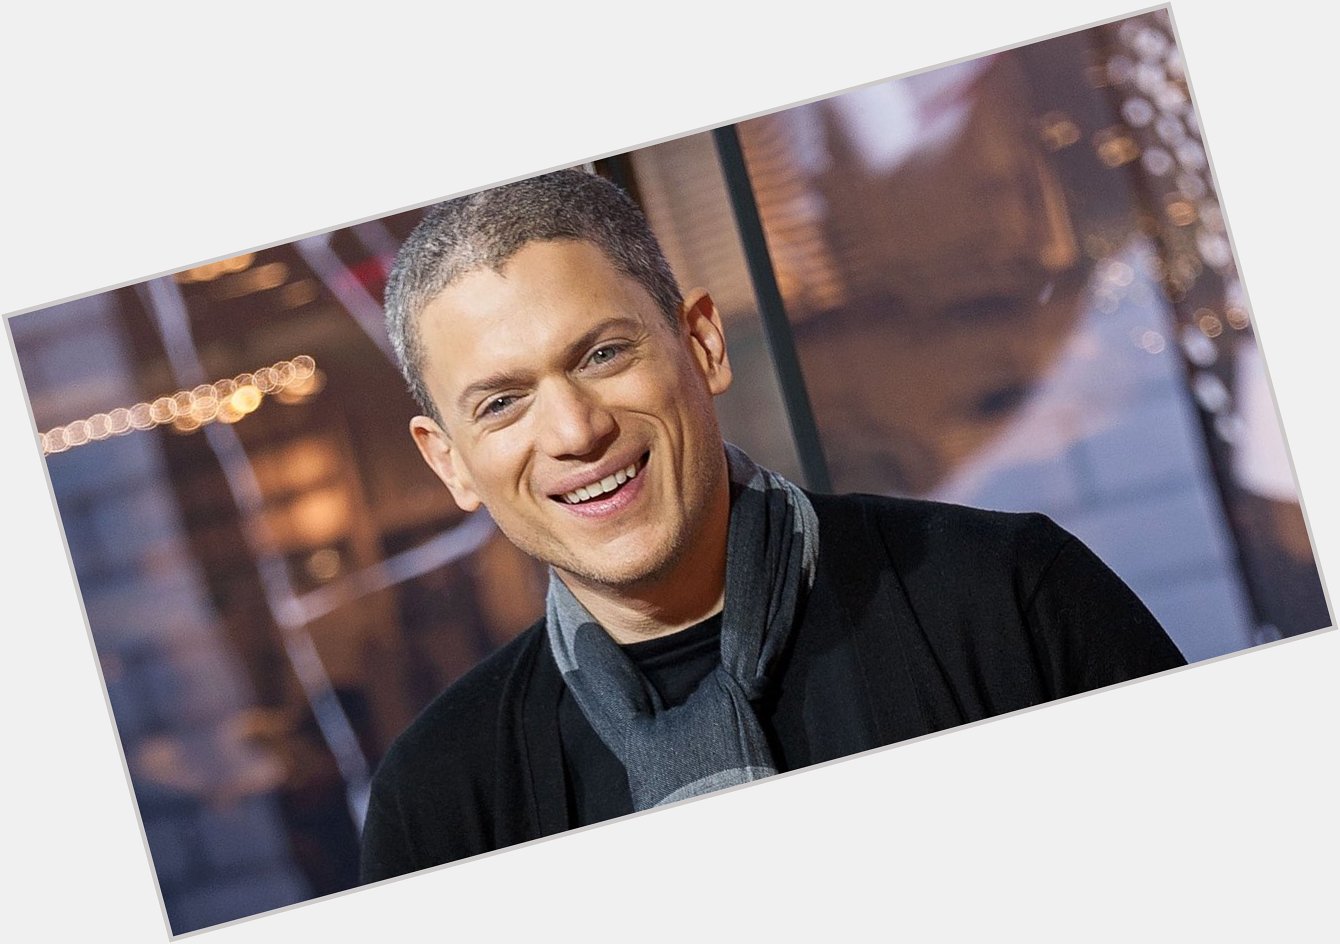 Happy birthday to one of the most talented people I know wentworth miller!! Hope you have the most amazing day      